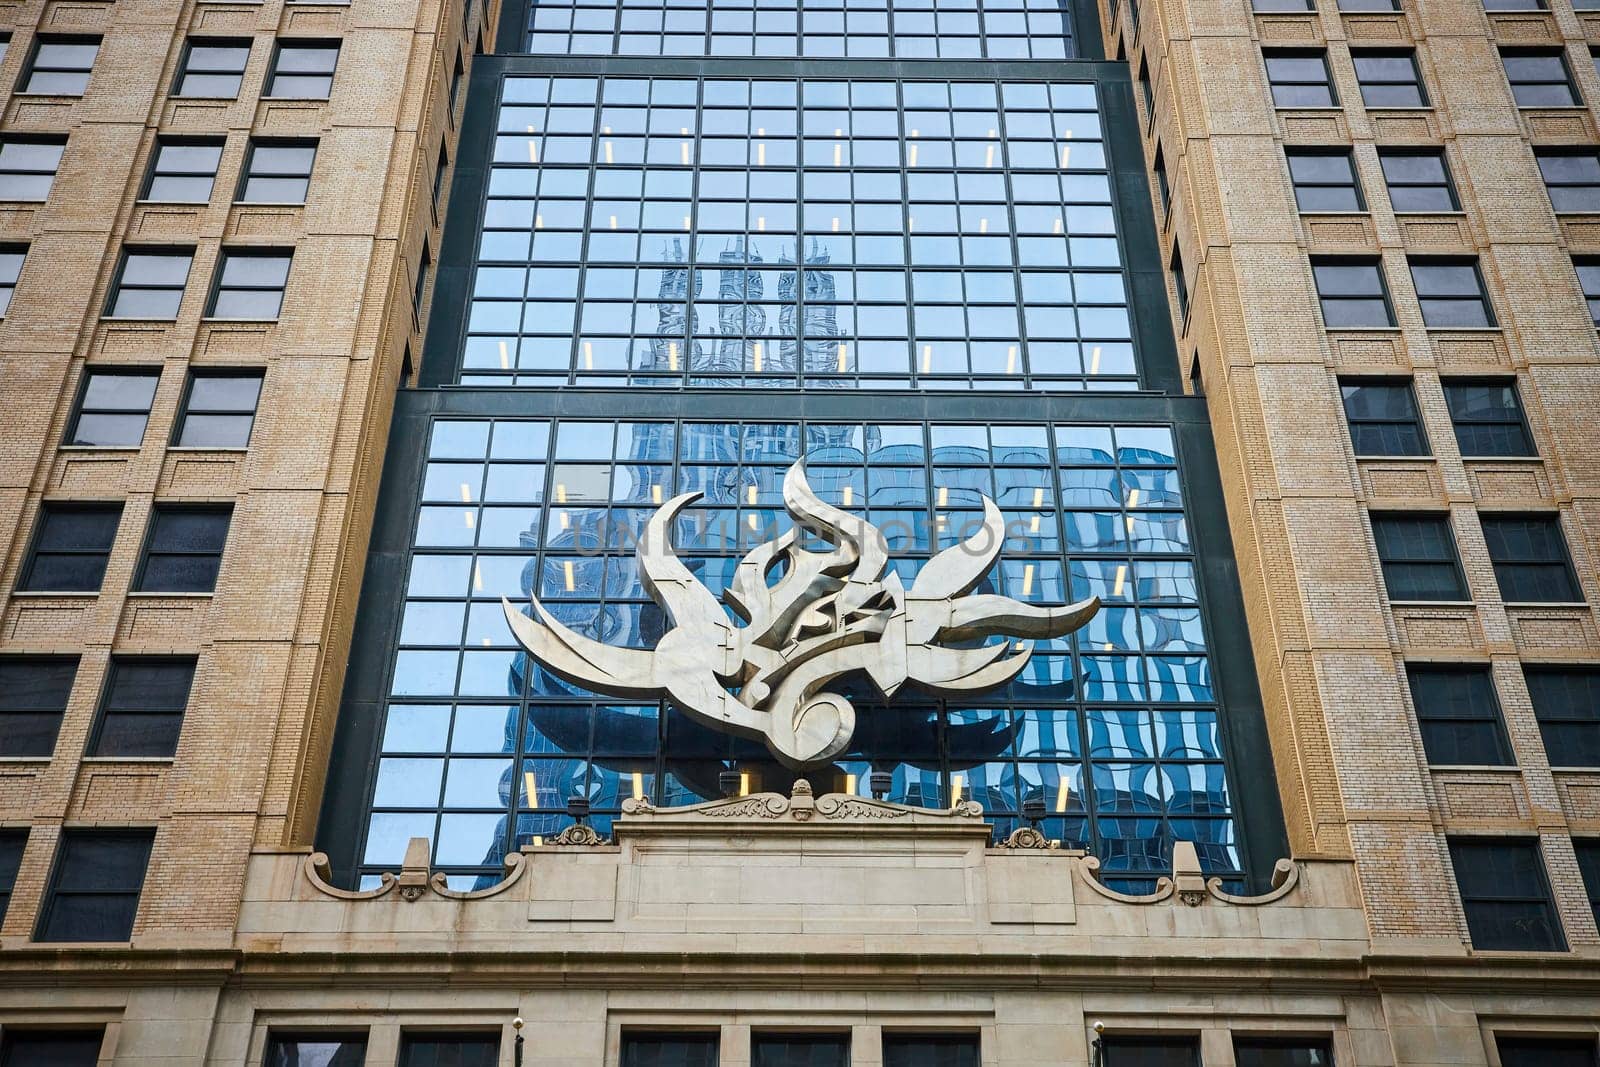 Chicago public art, abstract flame sculpture on downtown building with reflective blue windows by njproductions